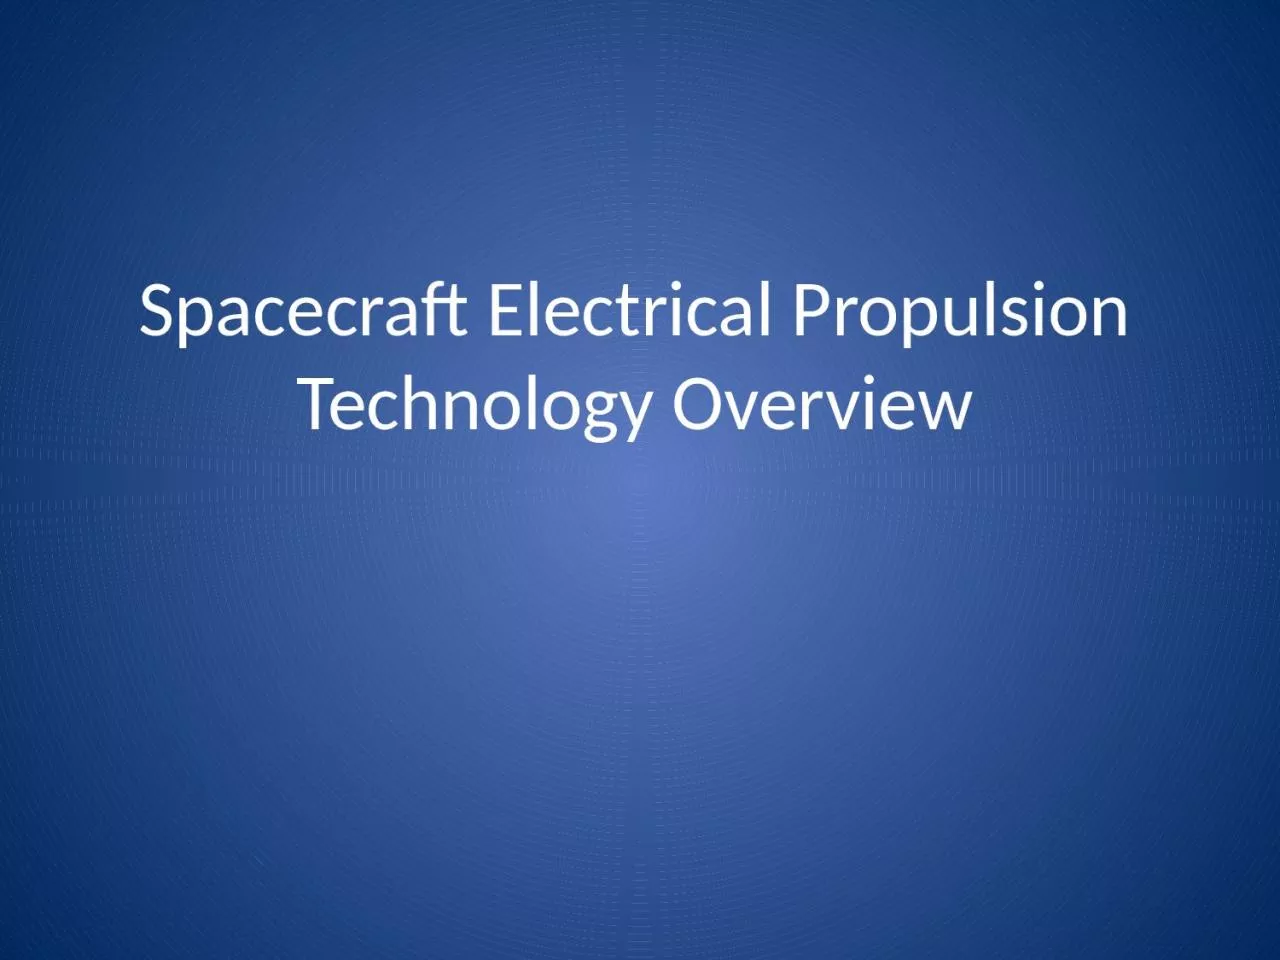 Spacecraft Electrical Propulsion Technology Overview